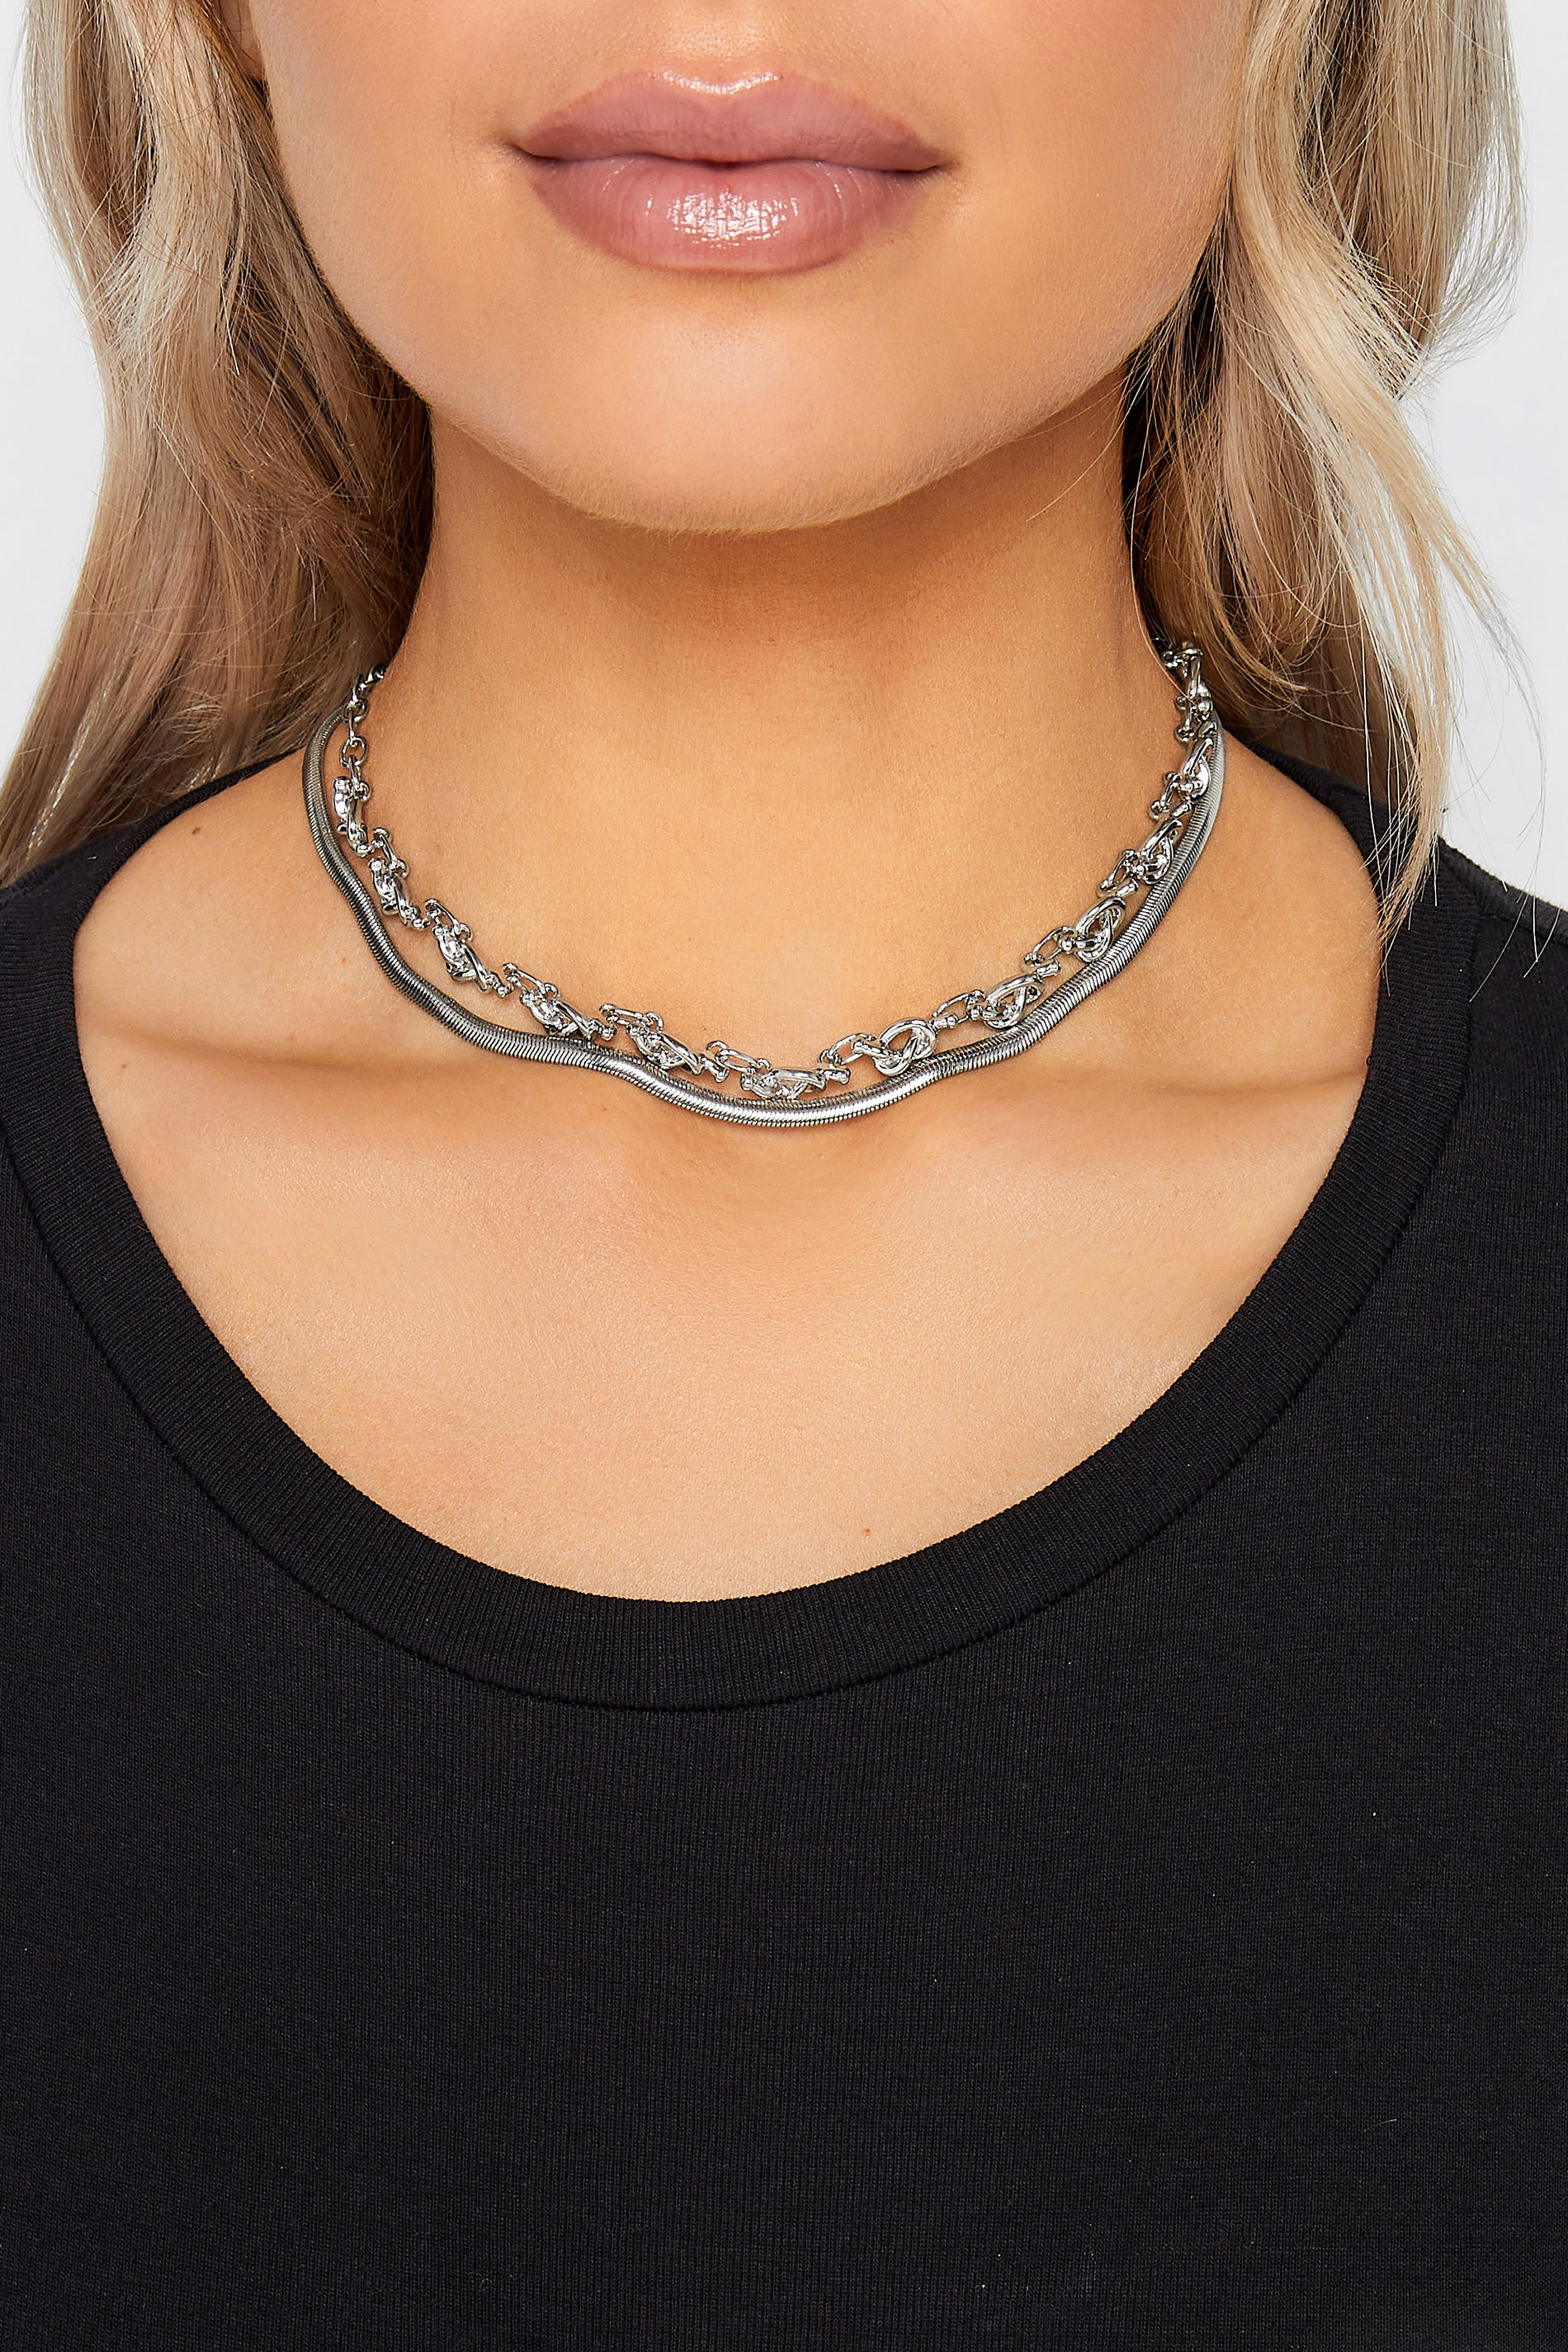 2 PACK Silver Knot Chain Choker Necklace 1